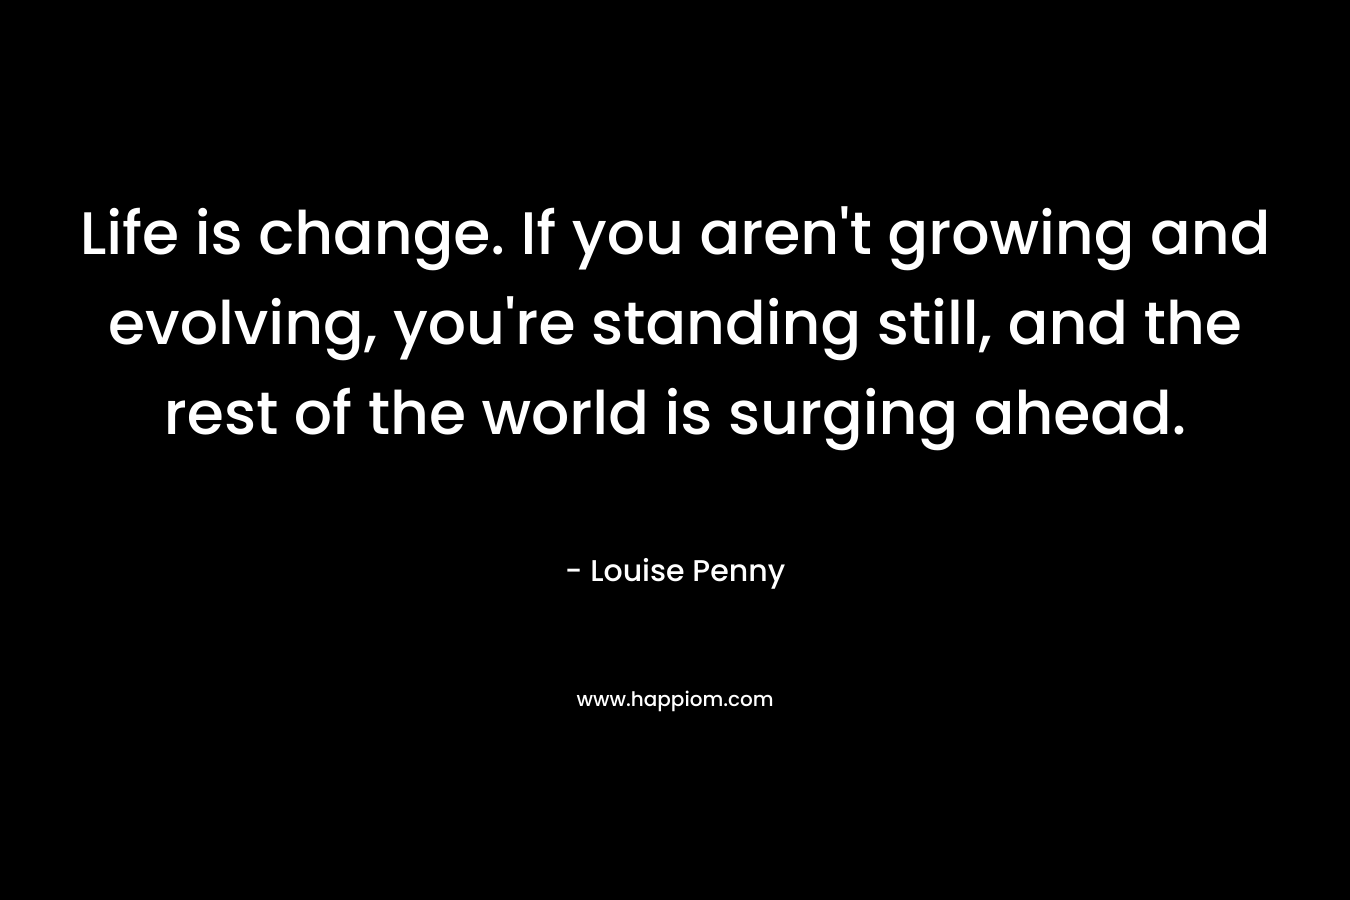 Life is change. If you aren't growing and evolving, you're standing still, and the rest of the world is surging ahead.